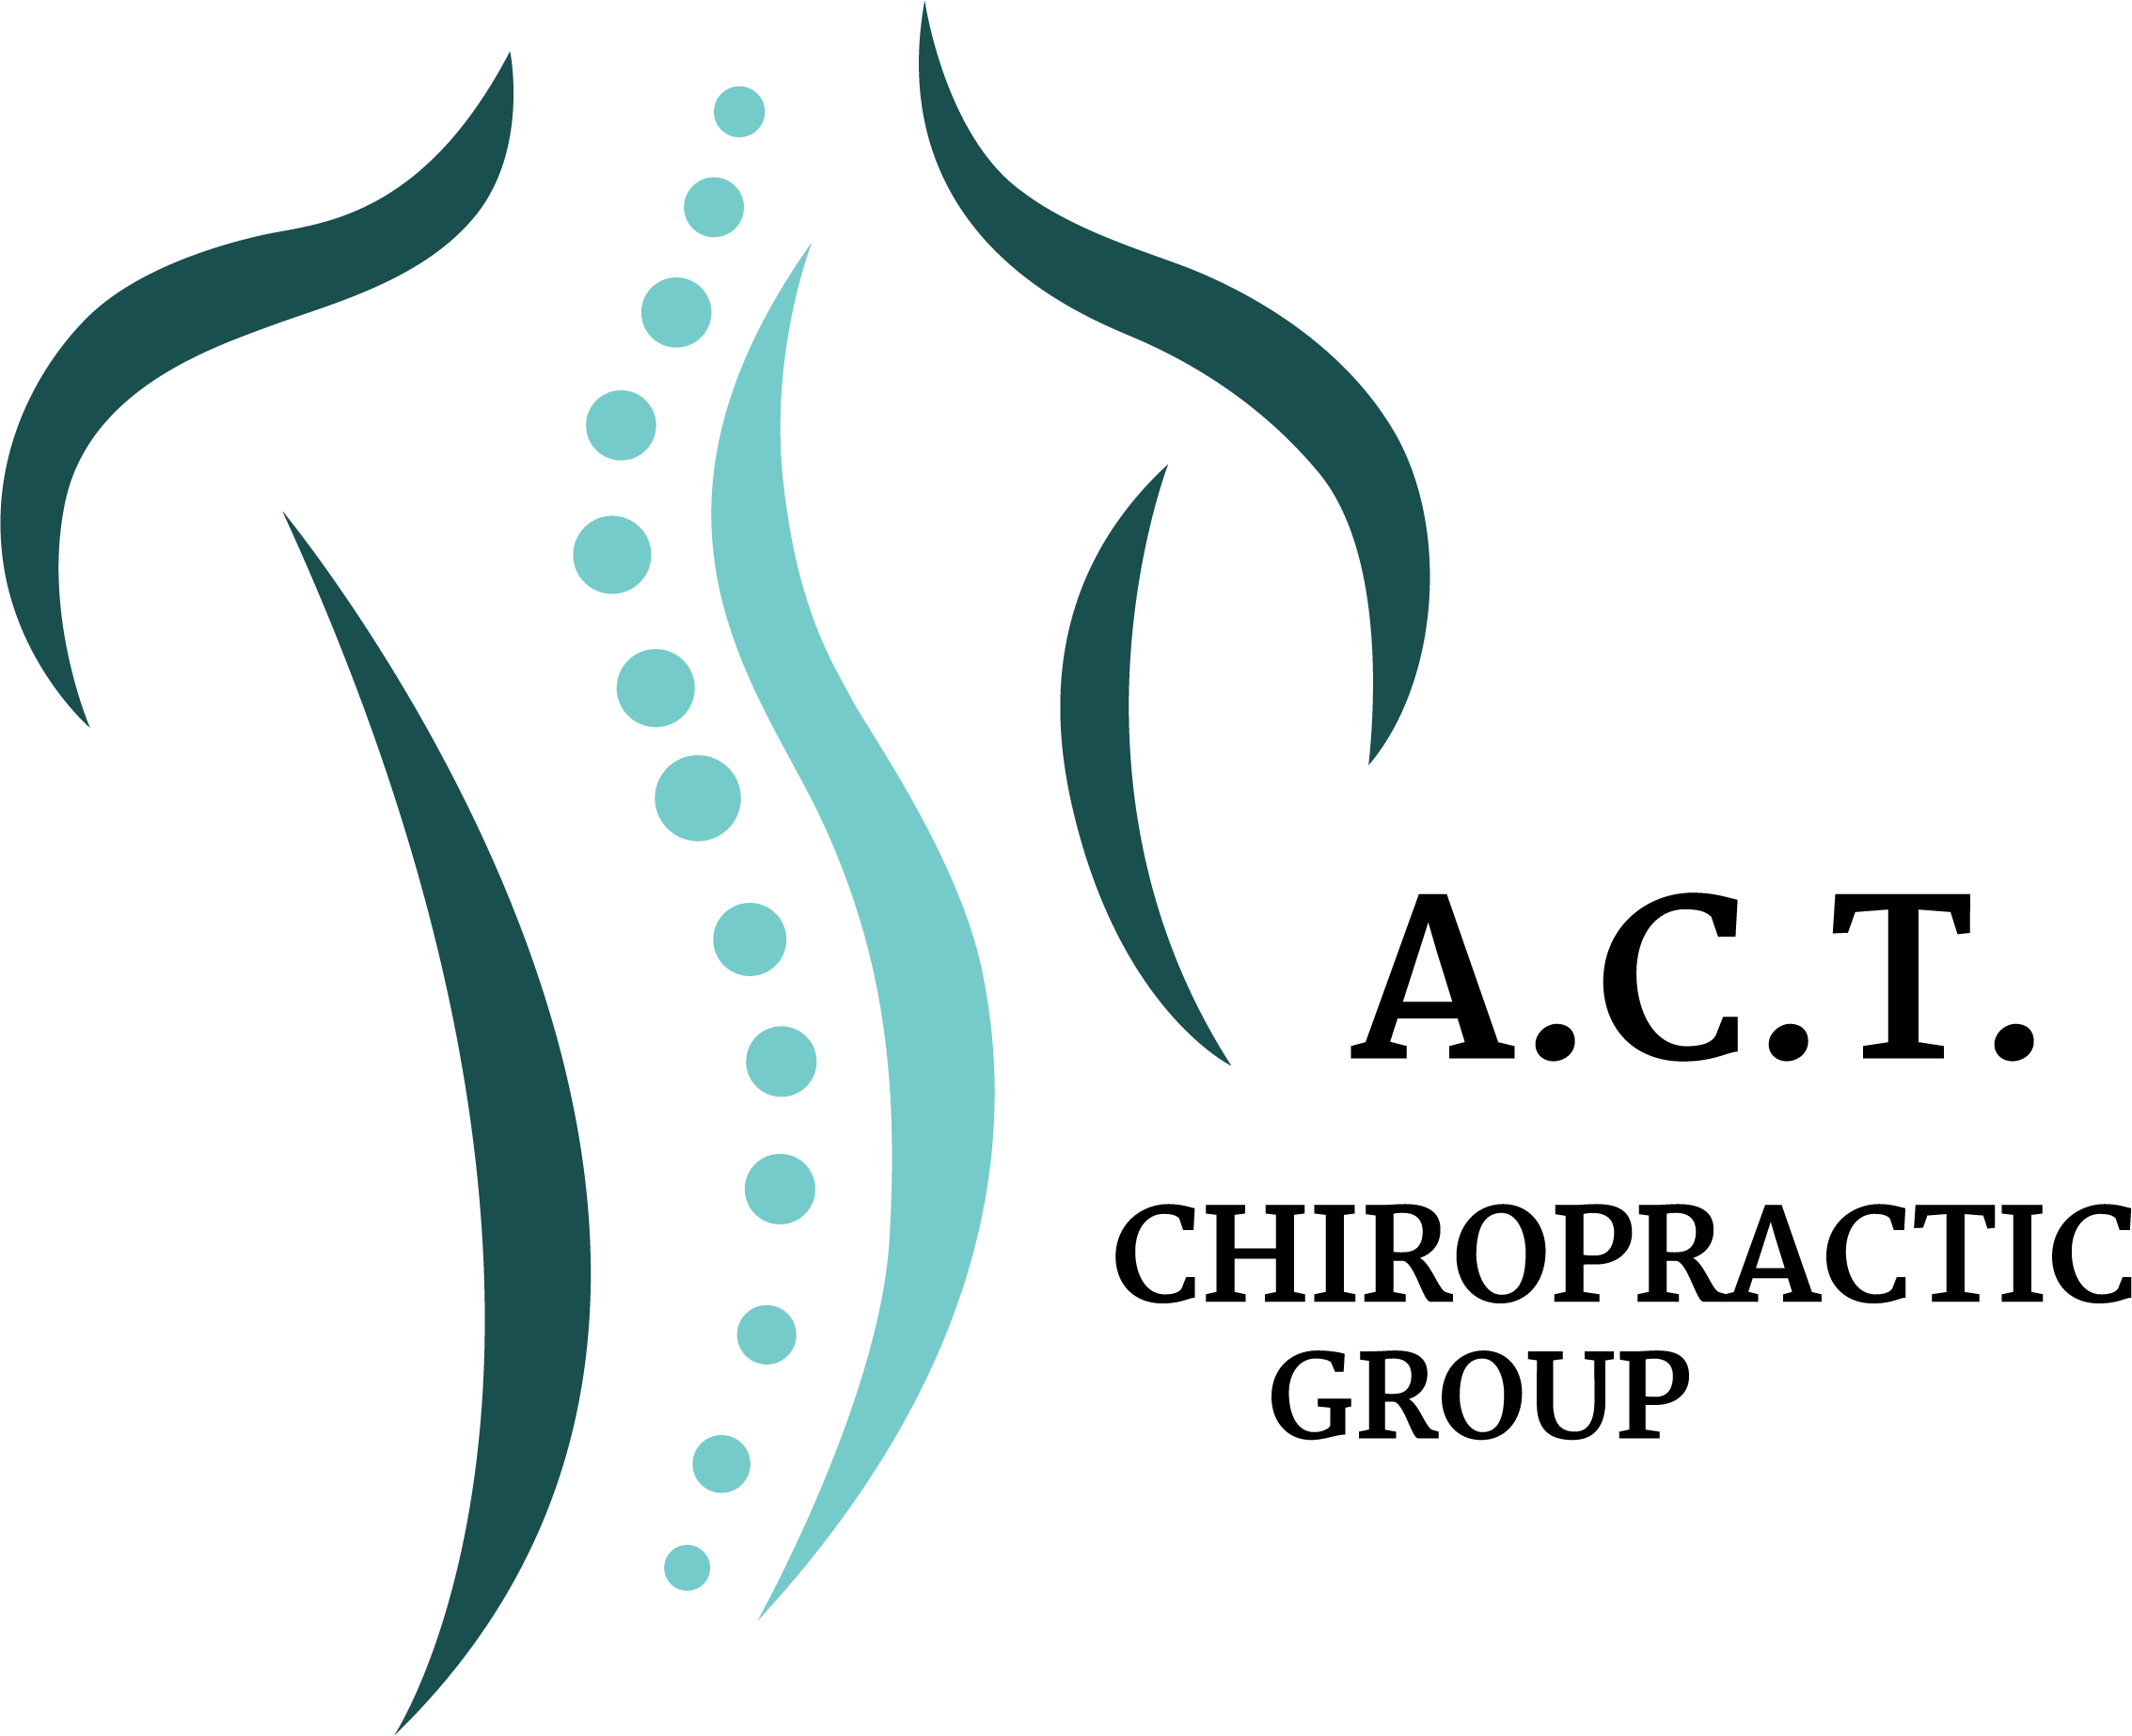 A.C.T Chiropractic Group